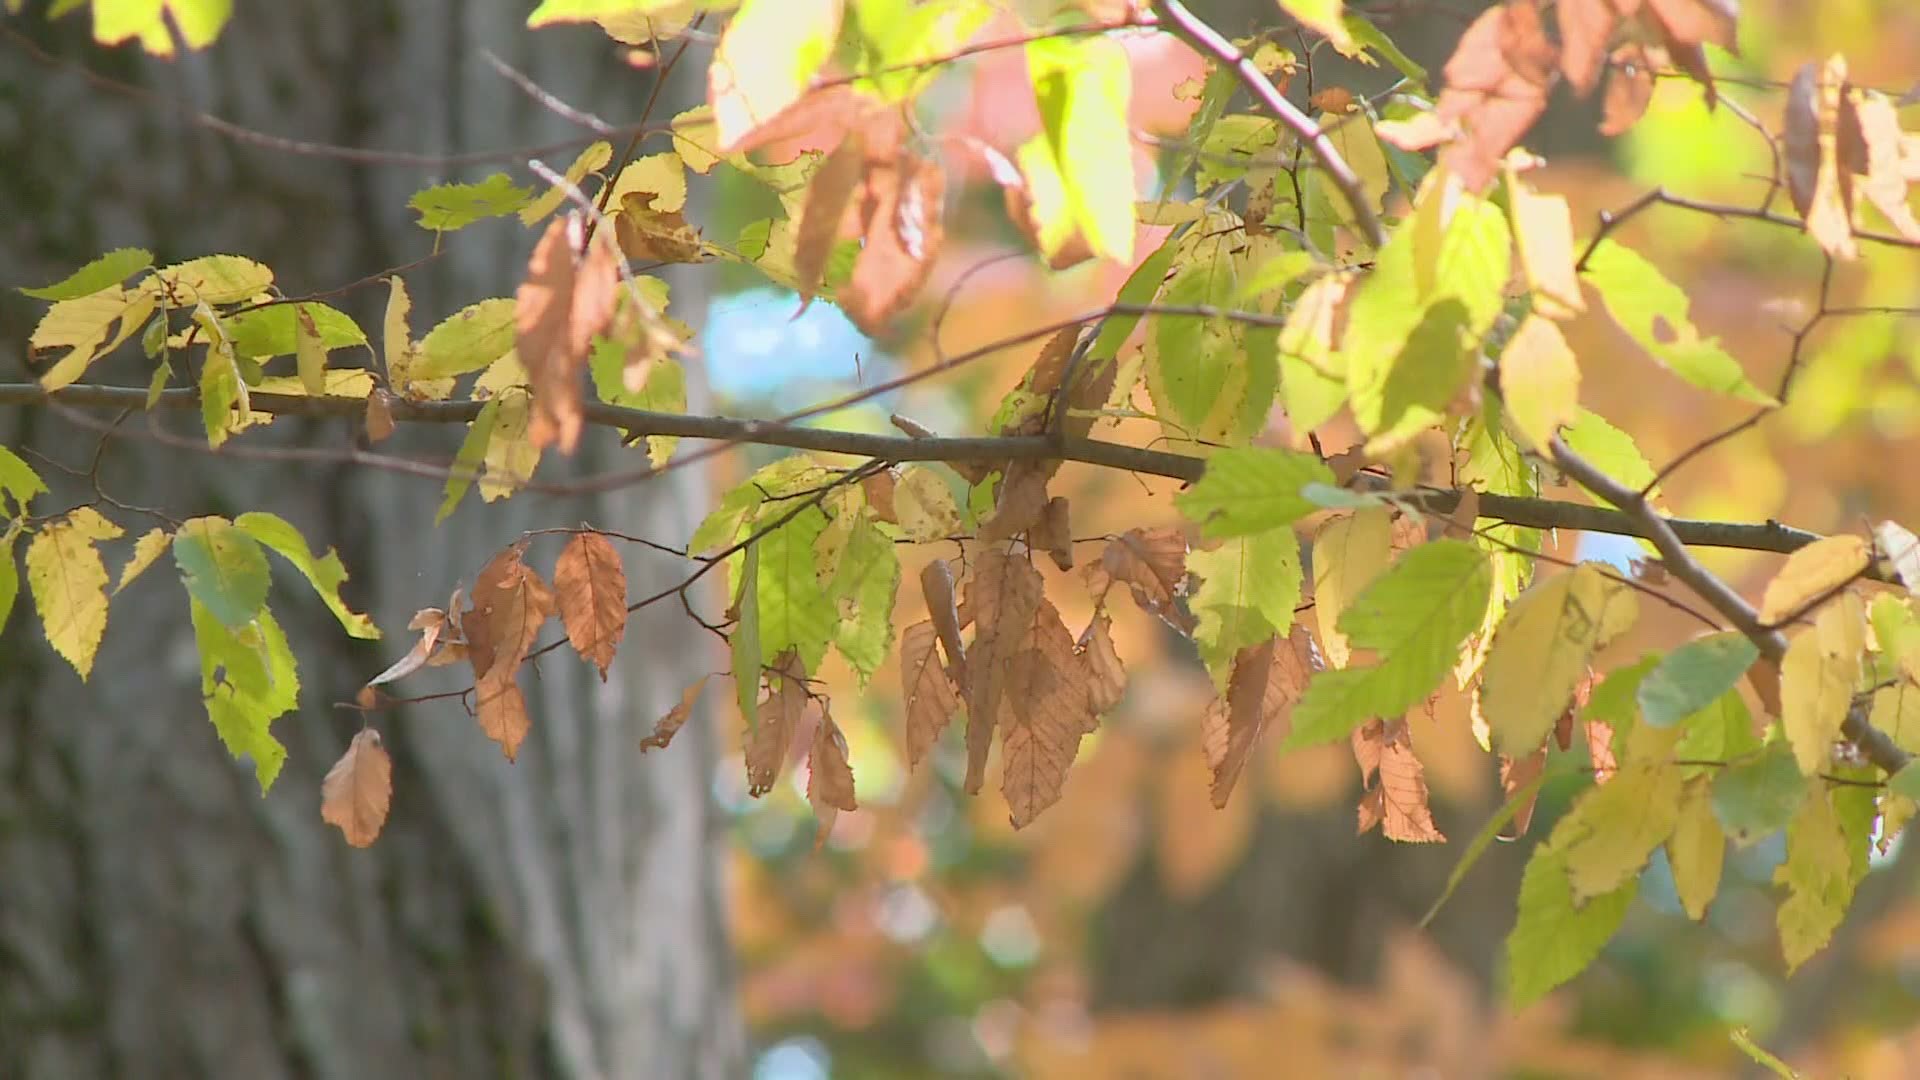 Experts say that some of the Maine foliage has hit early because of the drought conditions across the state